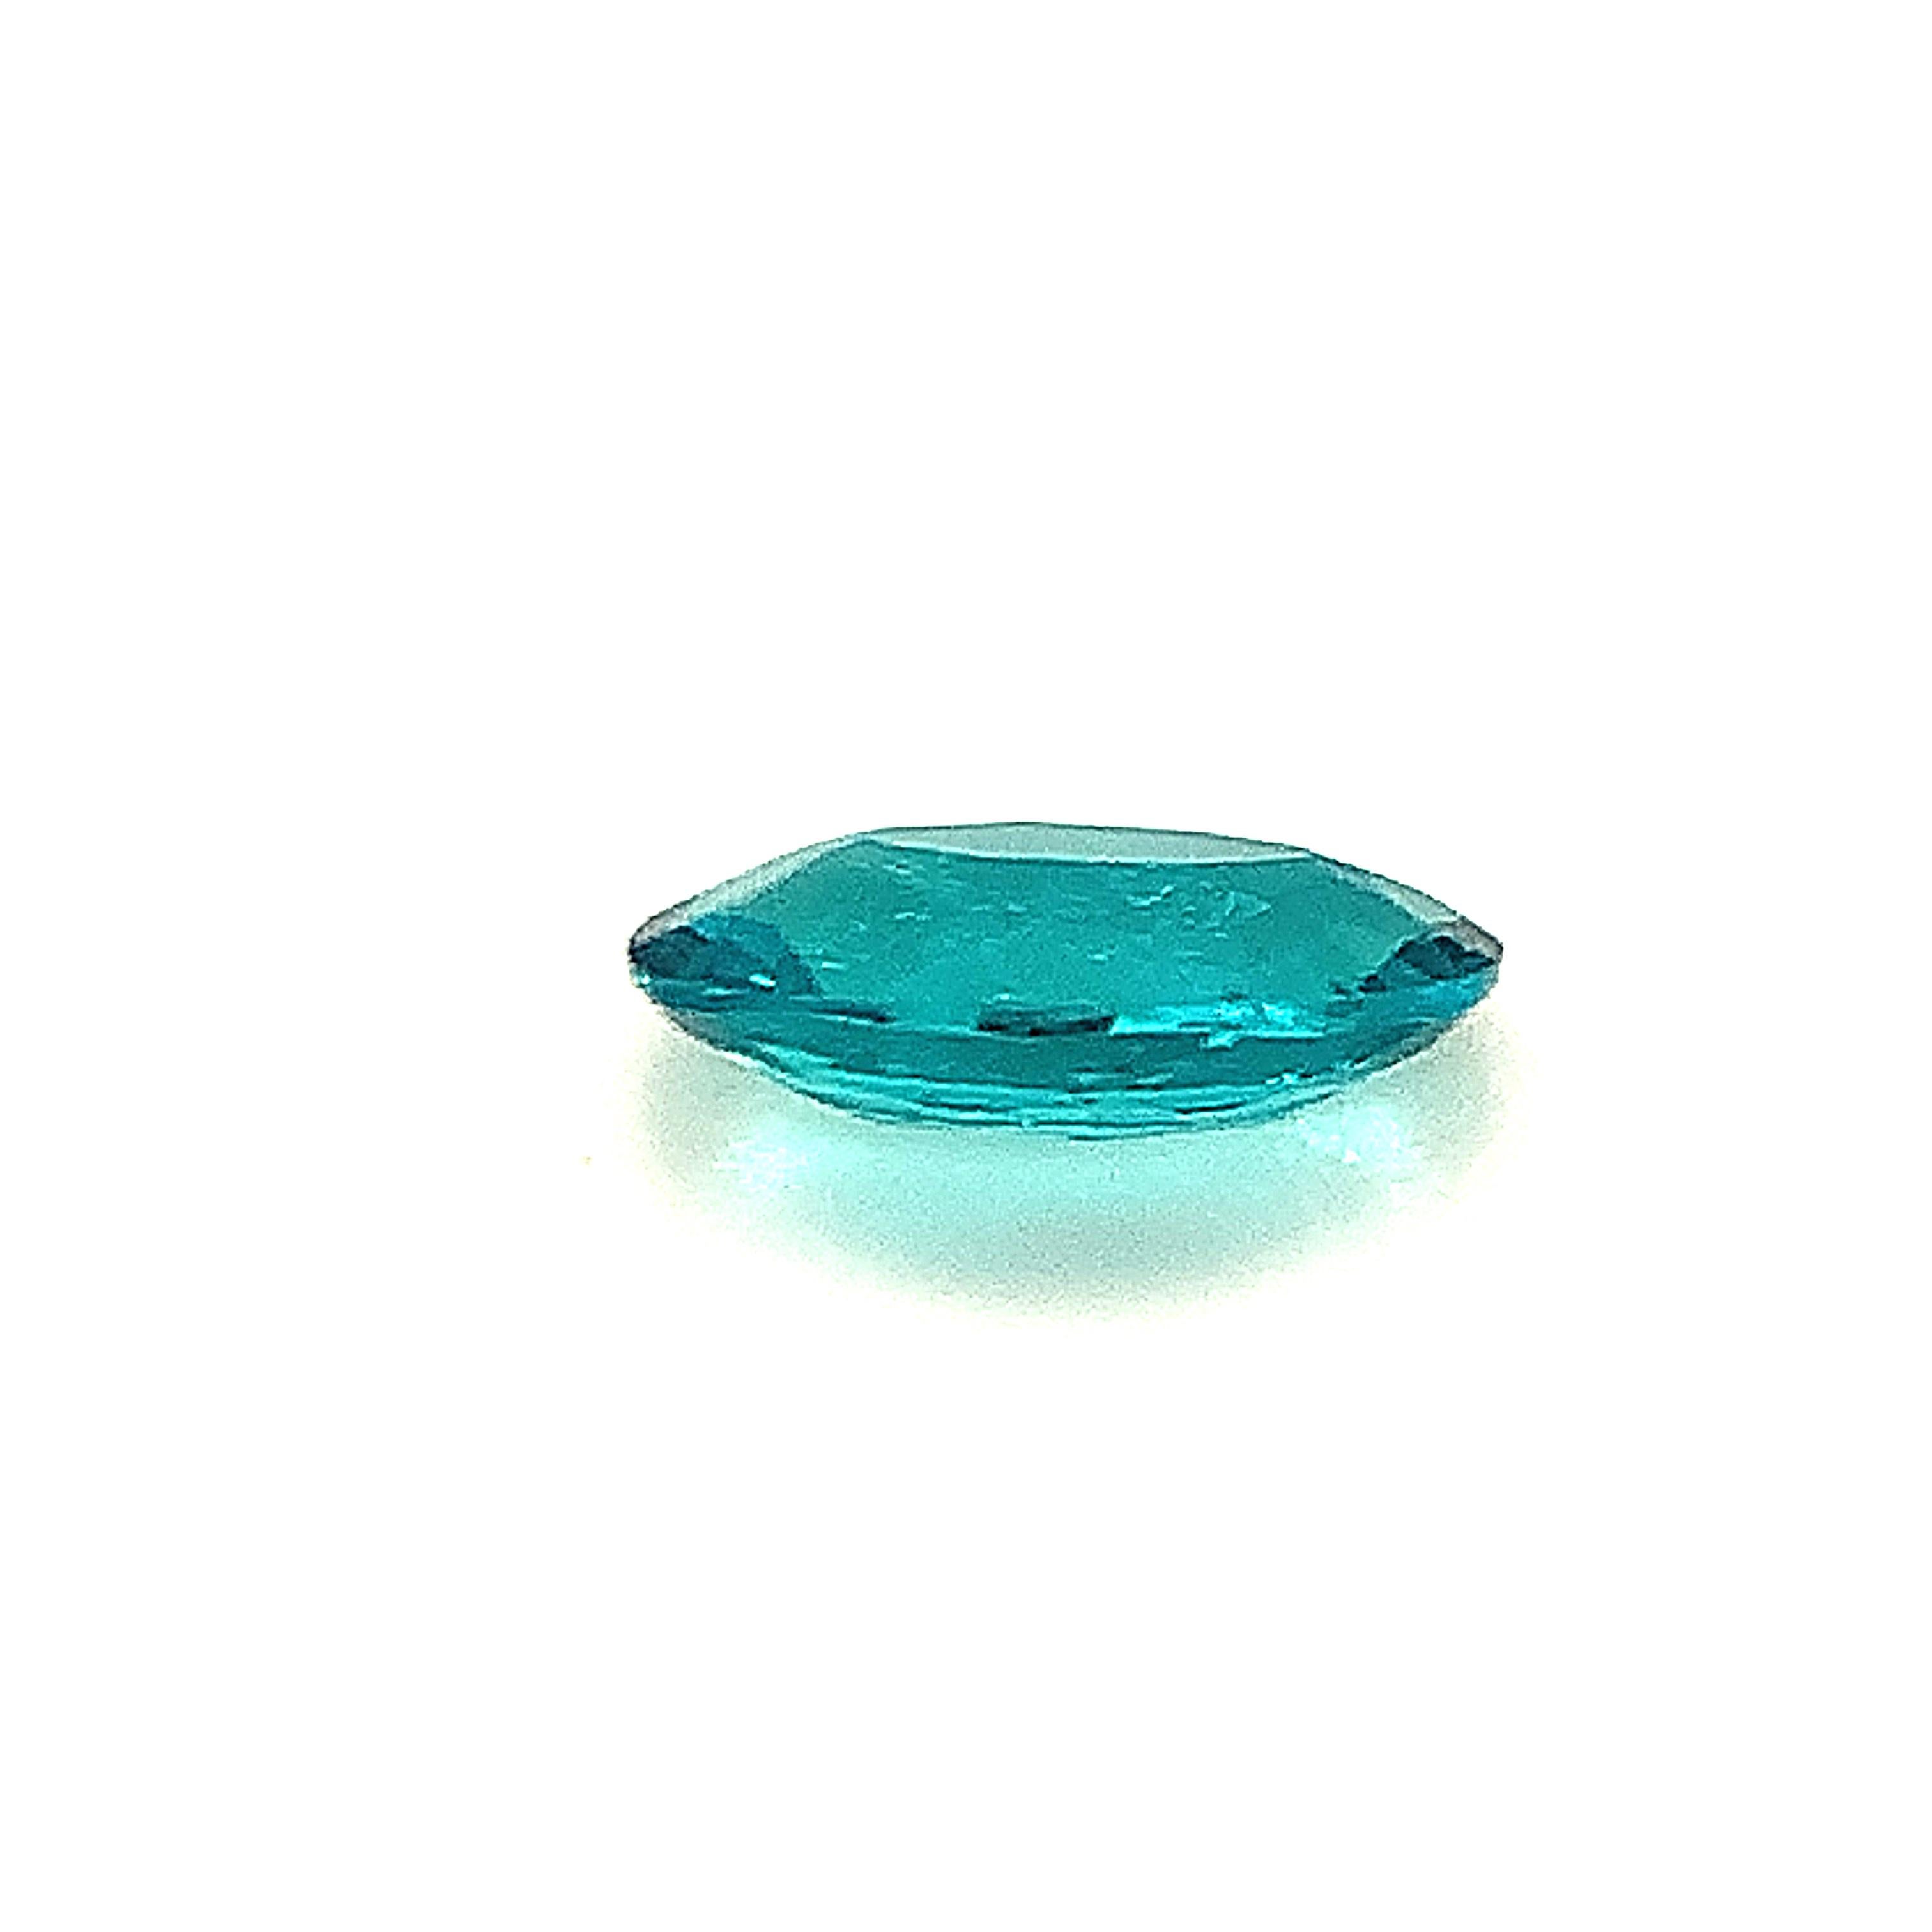 .19 Carat Brazilian Paraiba Tourmaline Oval, Loose Gemstone, GIA Certified ..A In New Condition For Sale In Los Angeles, CA